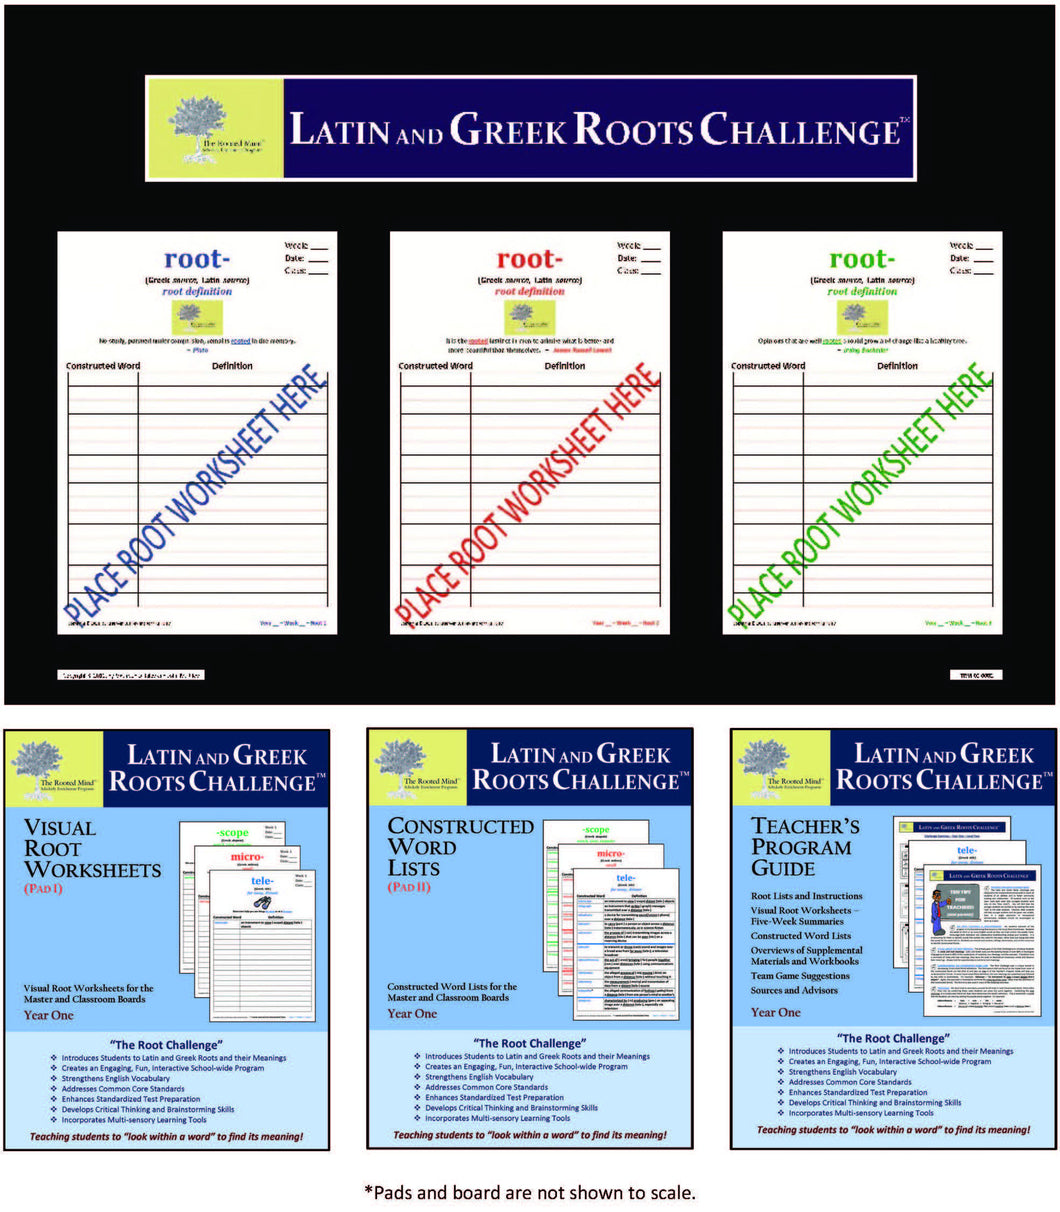 Latin and Greek Roots Challenge - Classroom Board Kit - Year 1